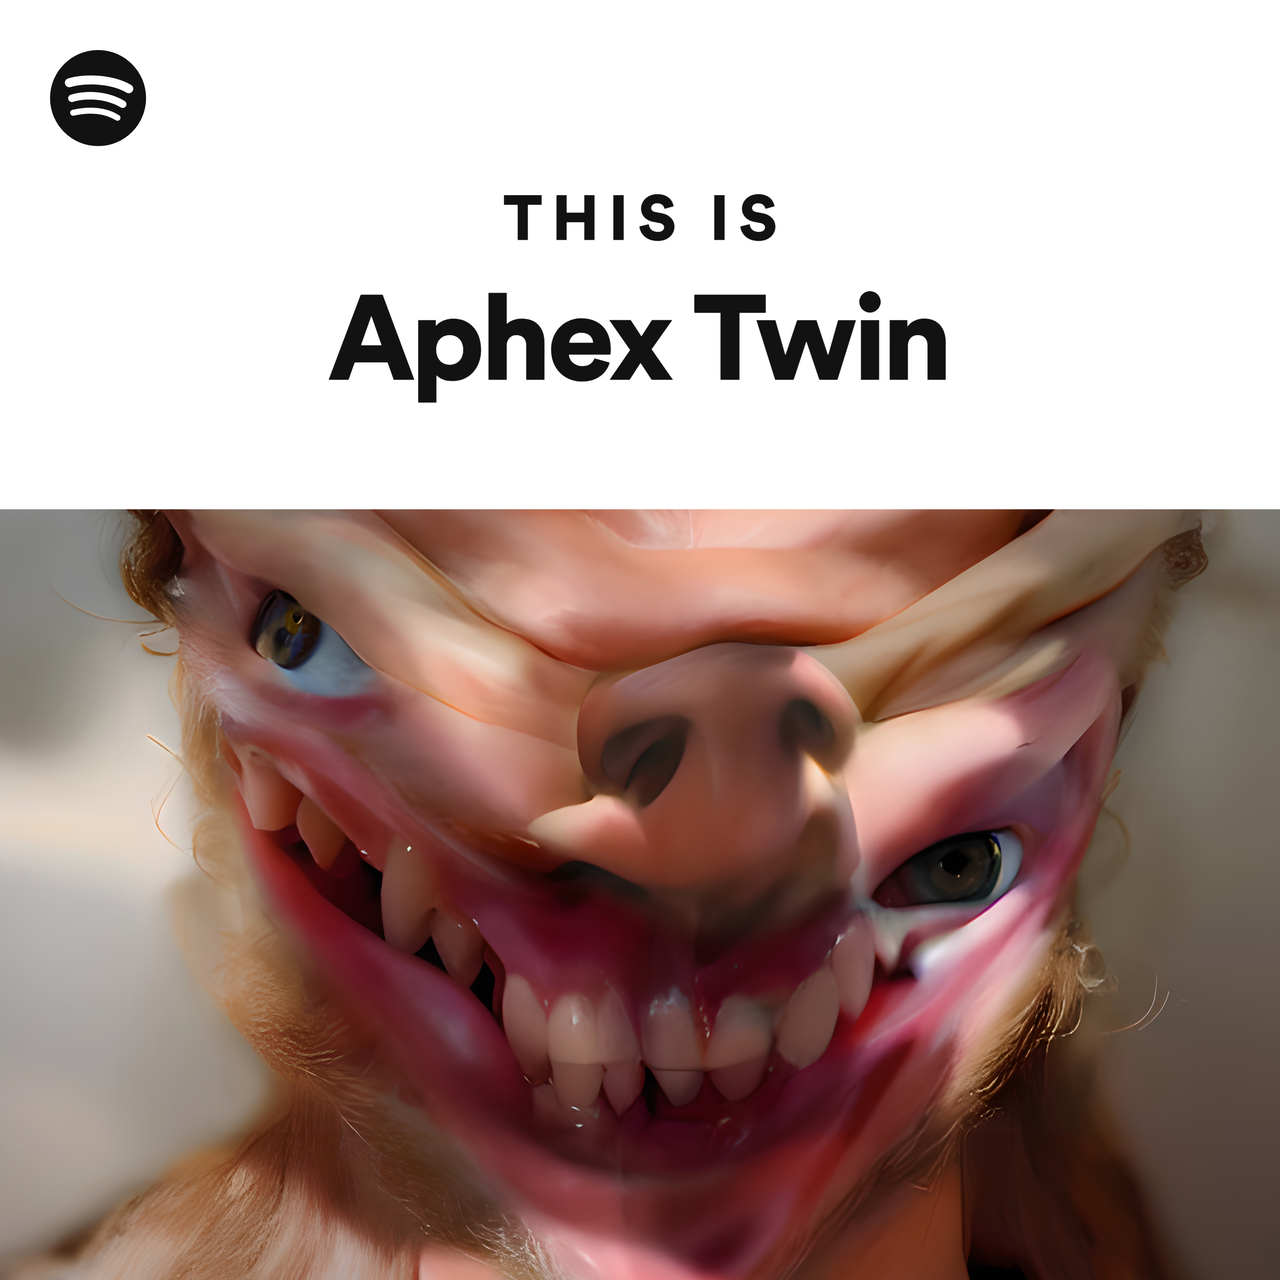 This Is Aphex Twin - playlist by Spotify | Spotify